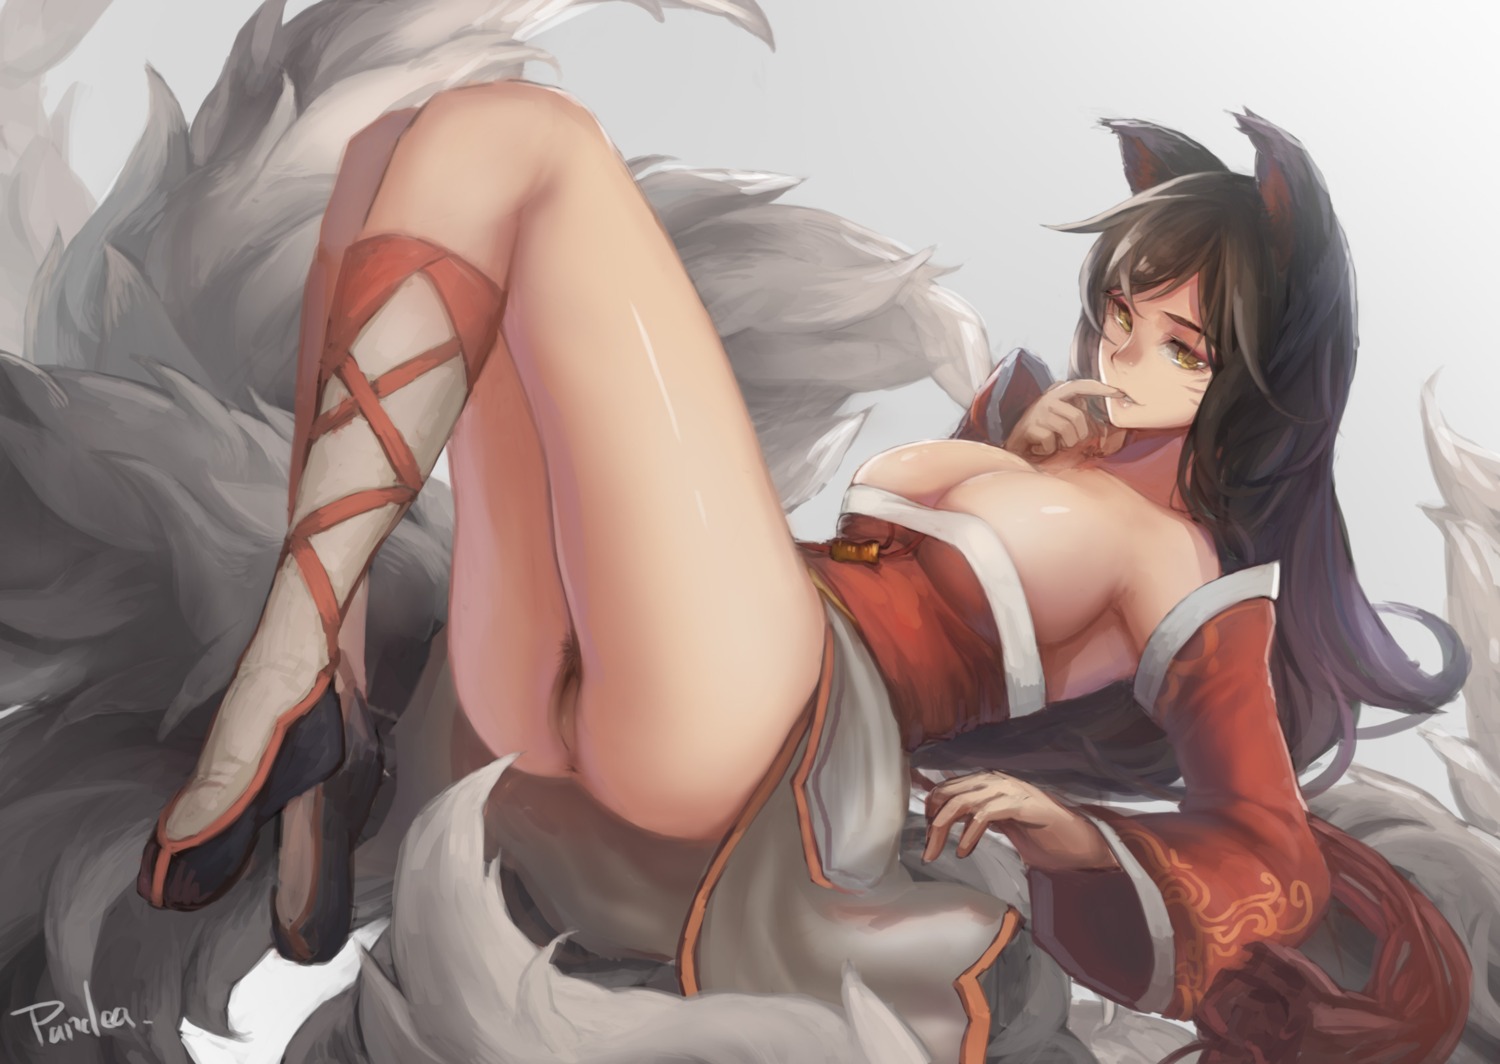 ahri animal_ears ass cleavage kitsune league_of_legends pubic_hair pussy sky_of_morika tail uncensored